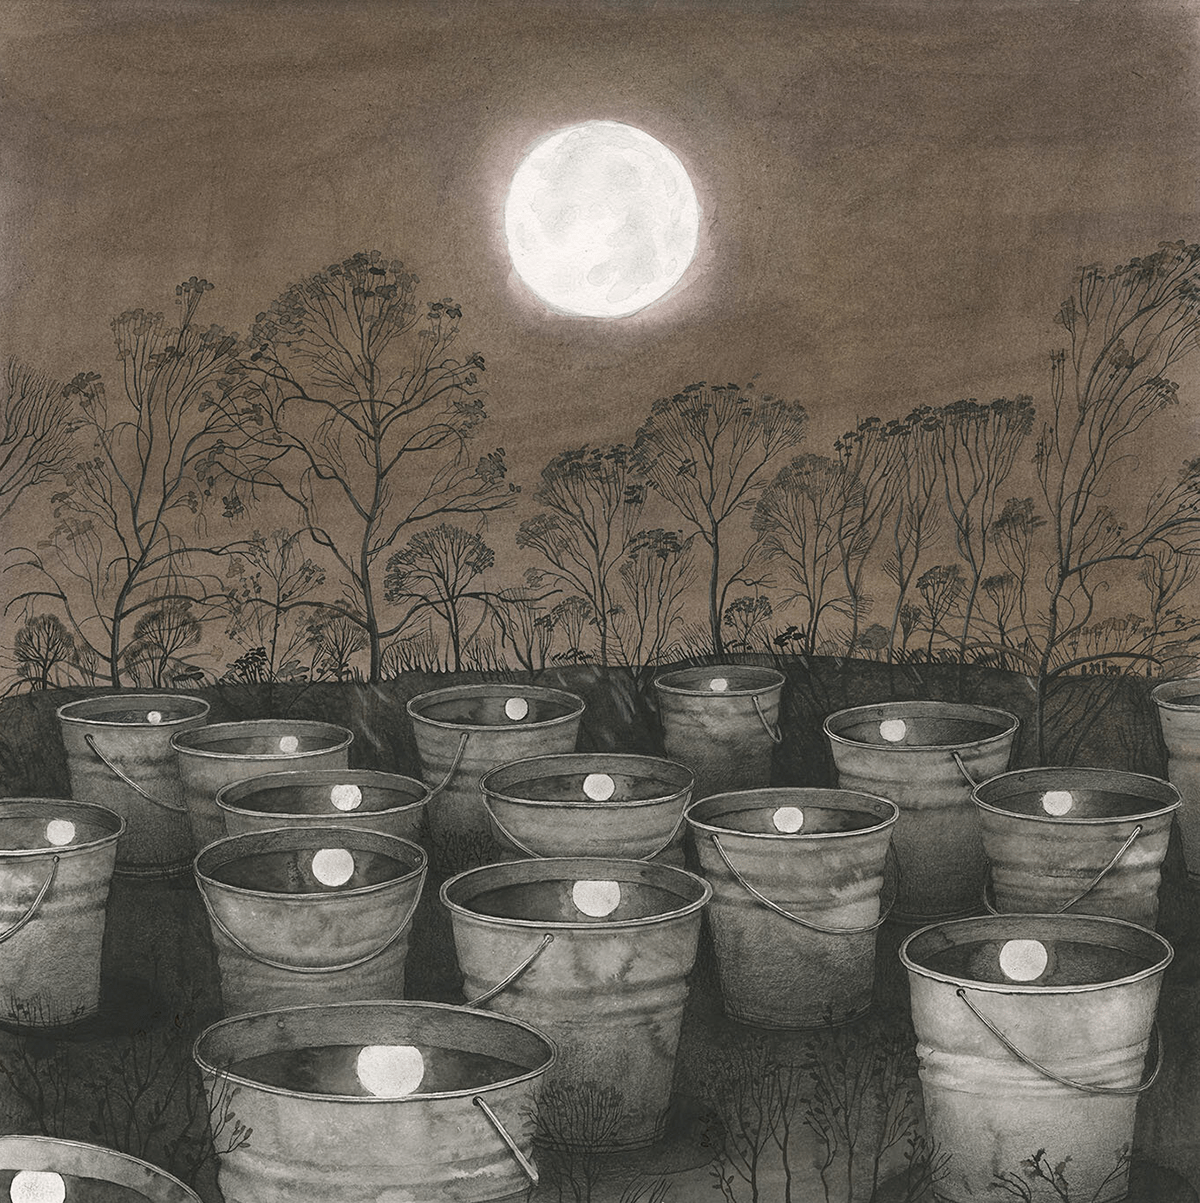 Full moon reflected in buckets of water